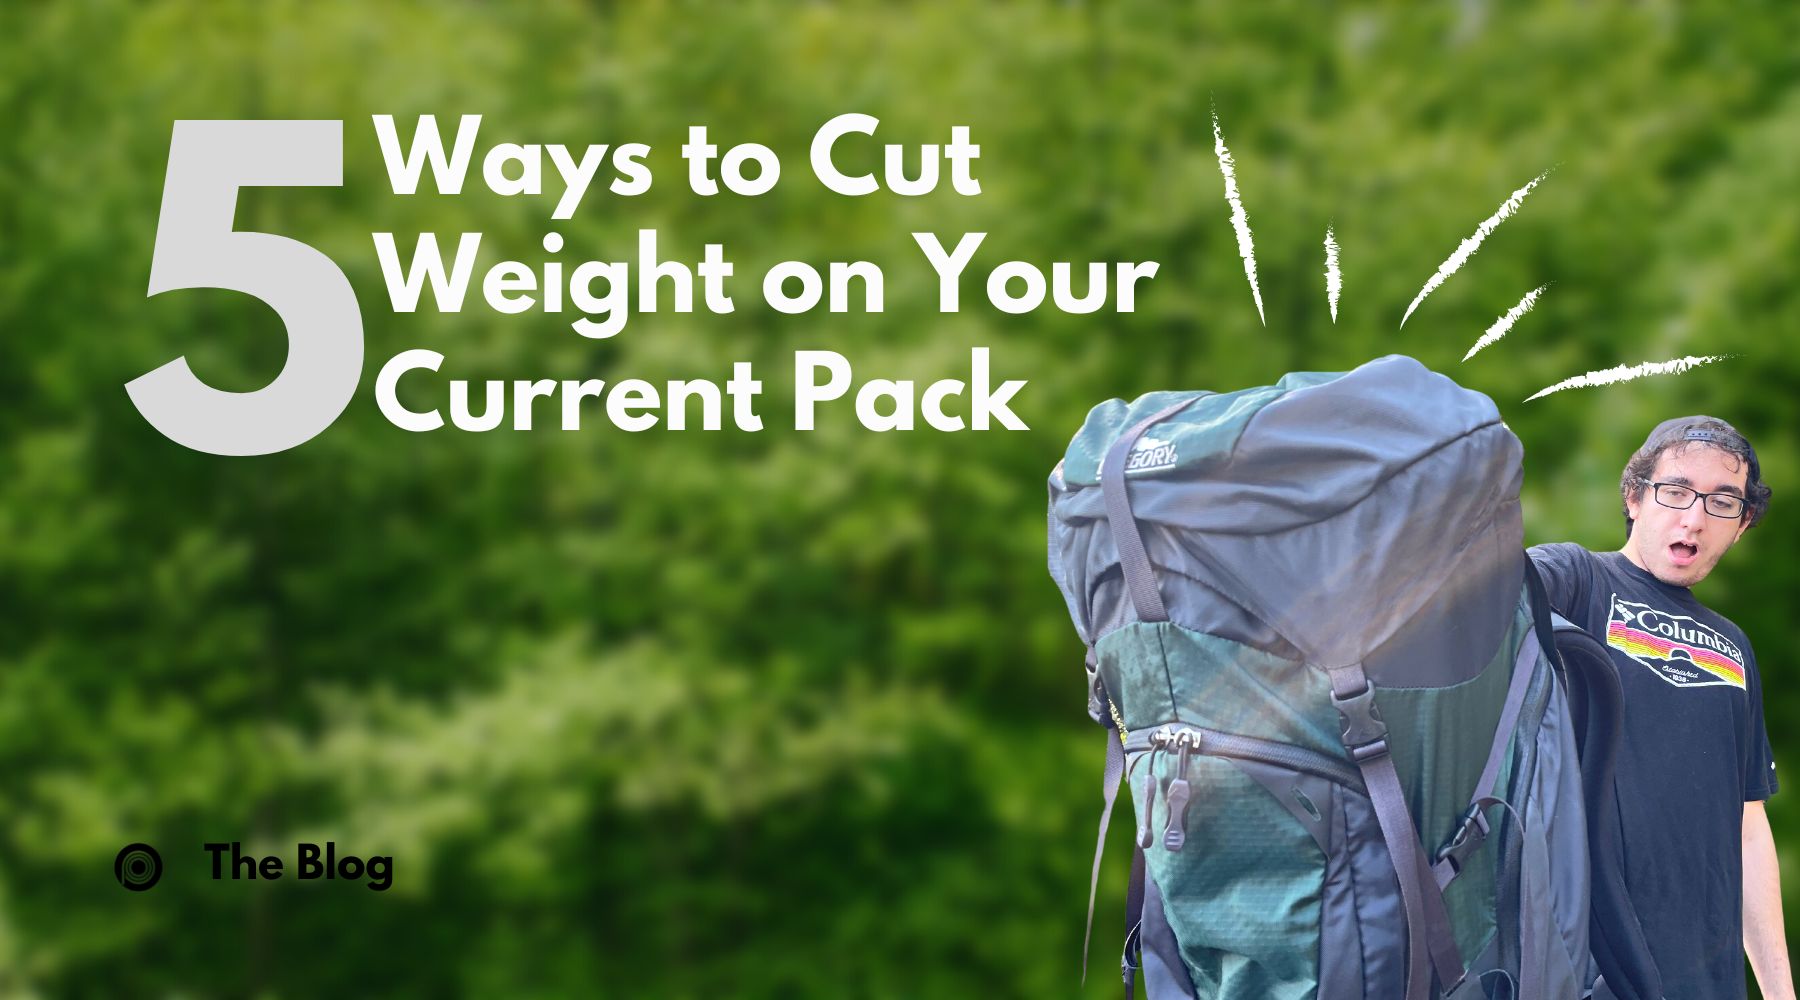 5 Wats to Cut Weight on Your Current Pack